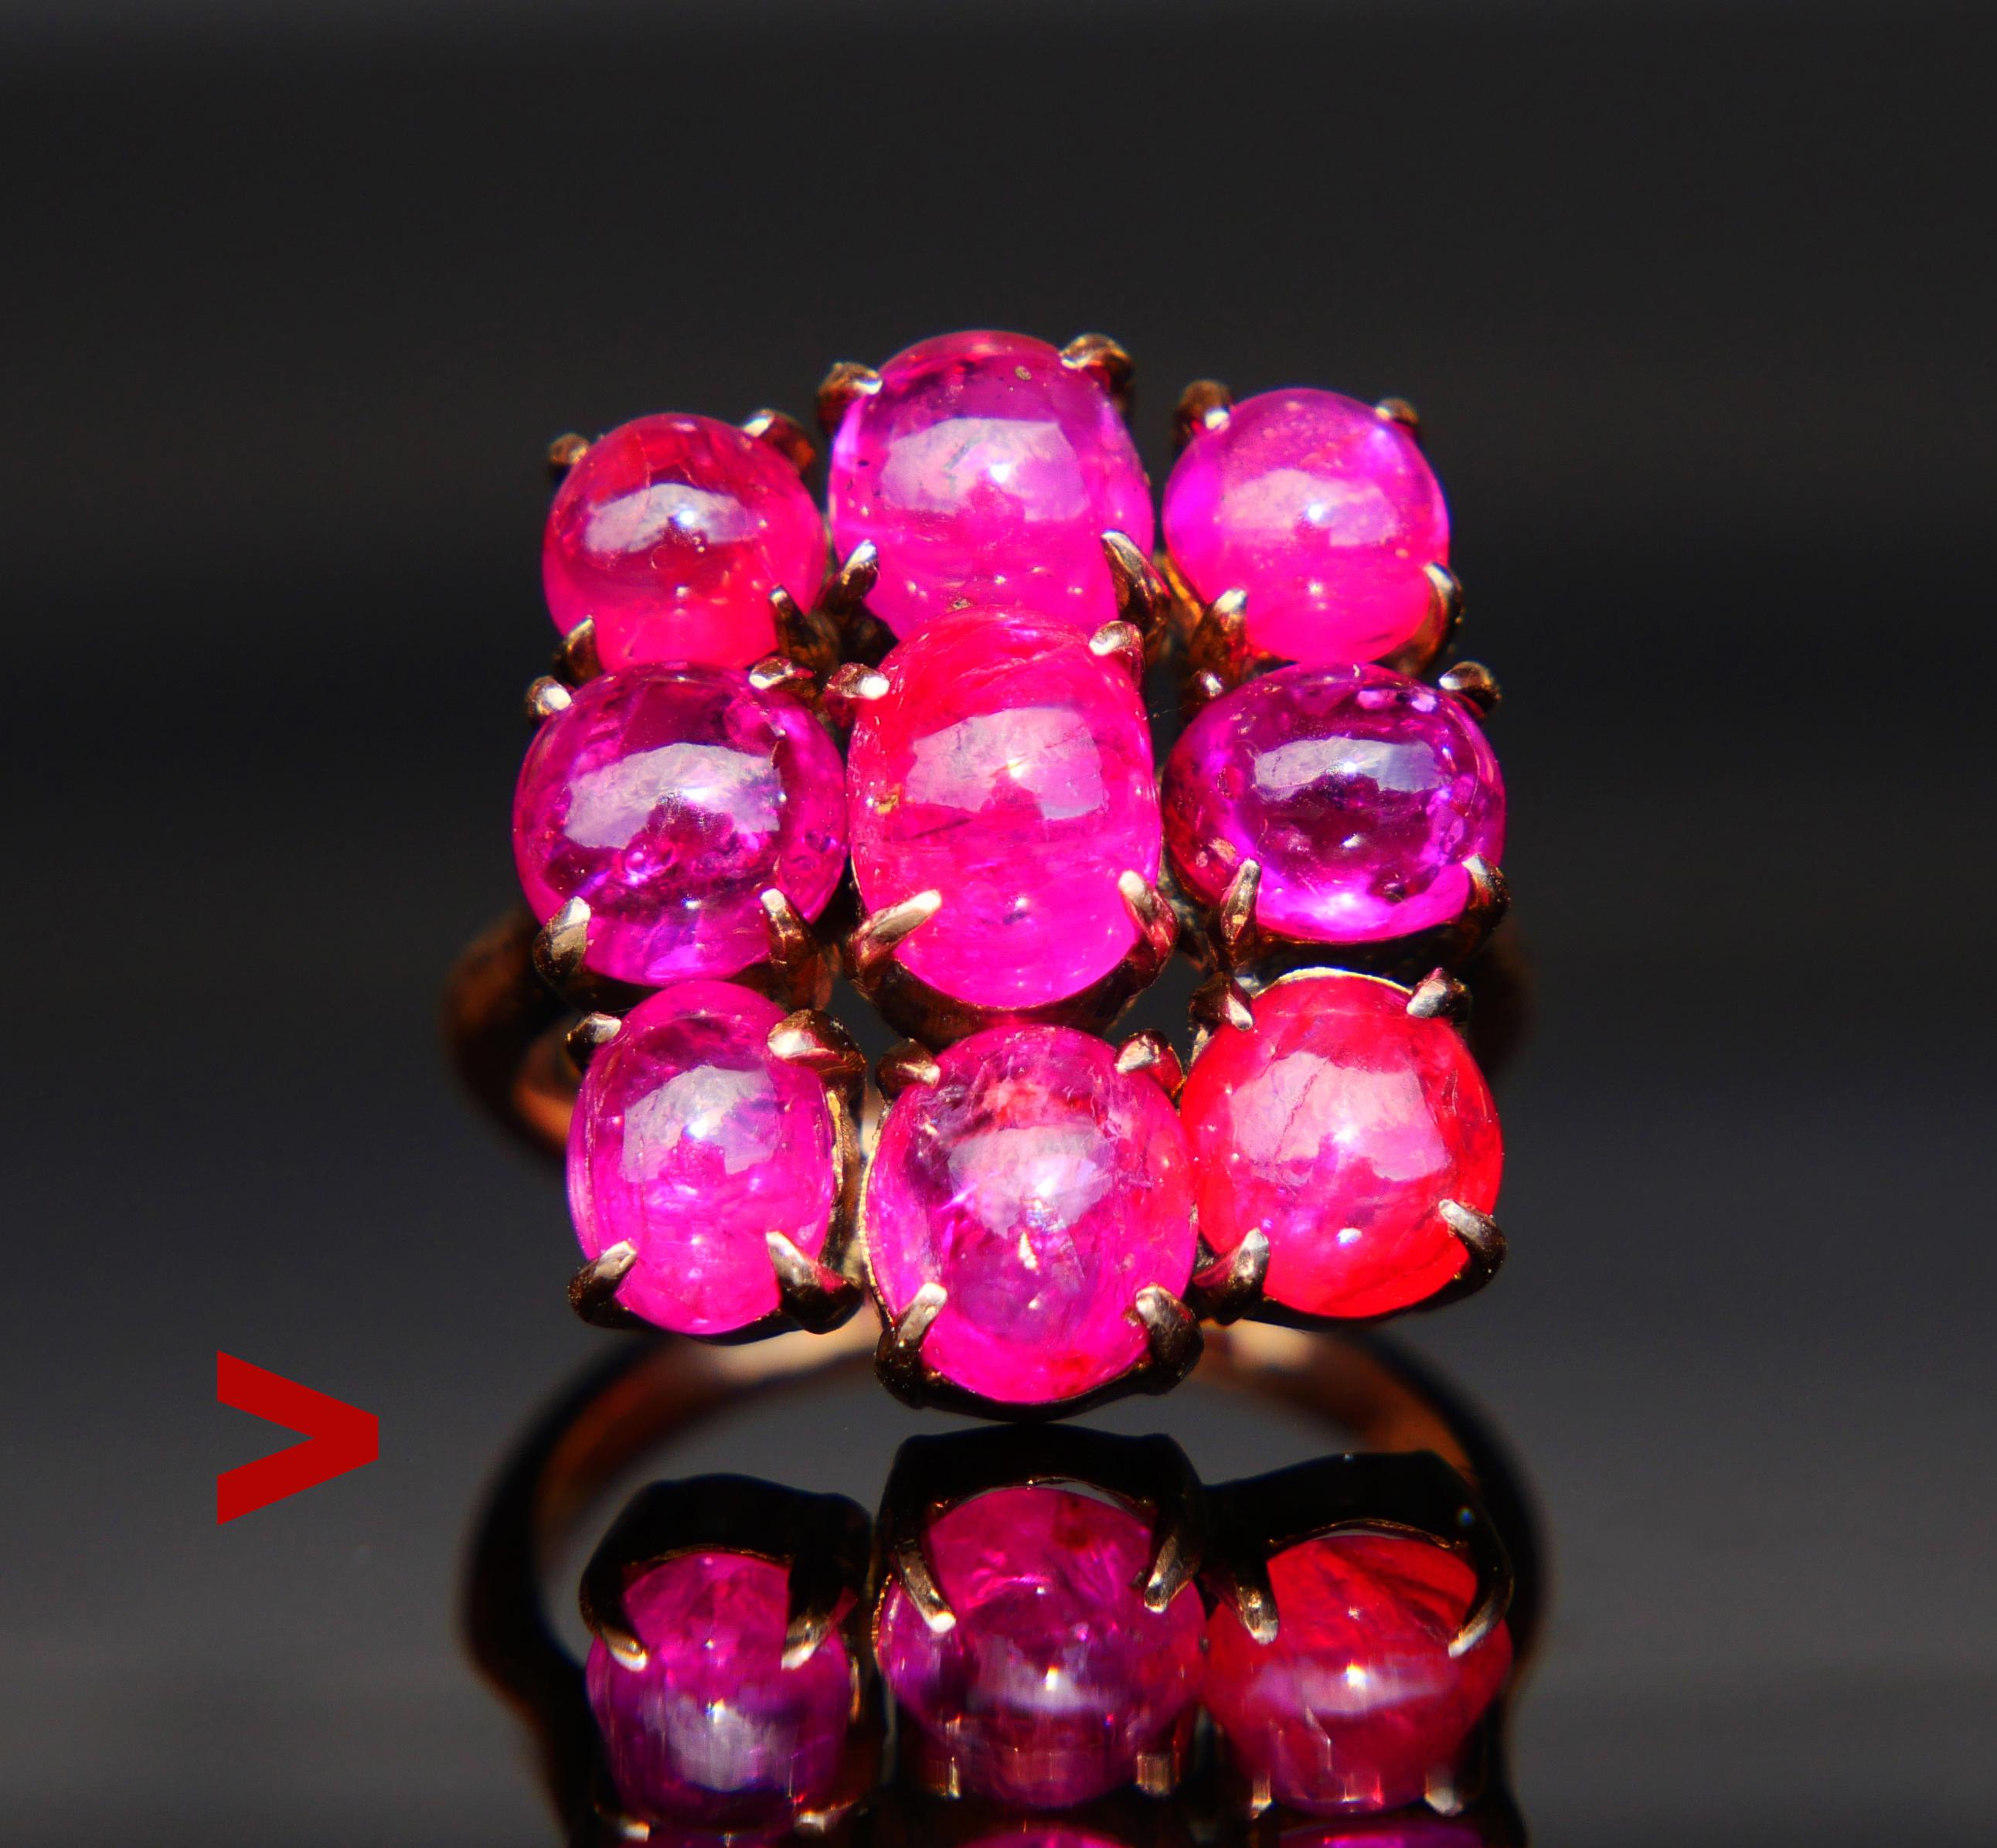 Antique cluster / cocktail Ring, German of Danish made with nine clusters boasting natural Ceylon Rubies cut cabochon.

Total weight of the stones ca 16ctw. Eight stones of similar pinkish Red color ,one stone has more Red than the others. All show